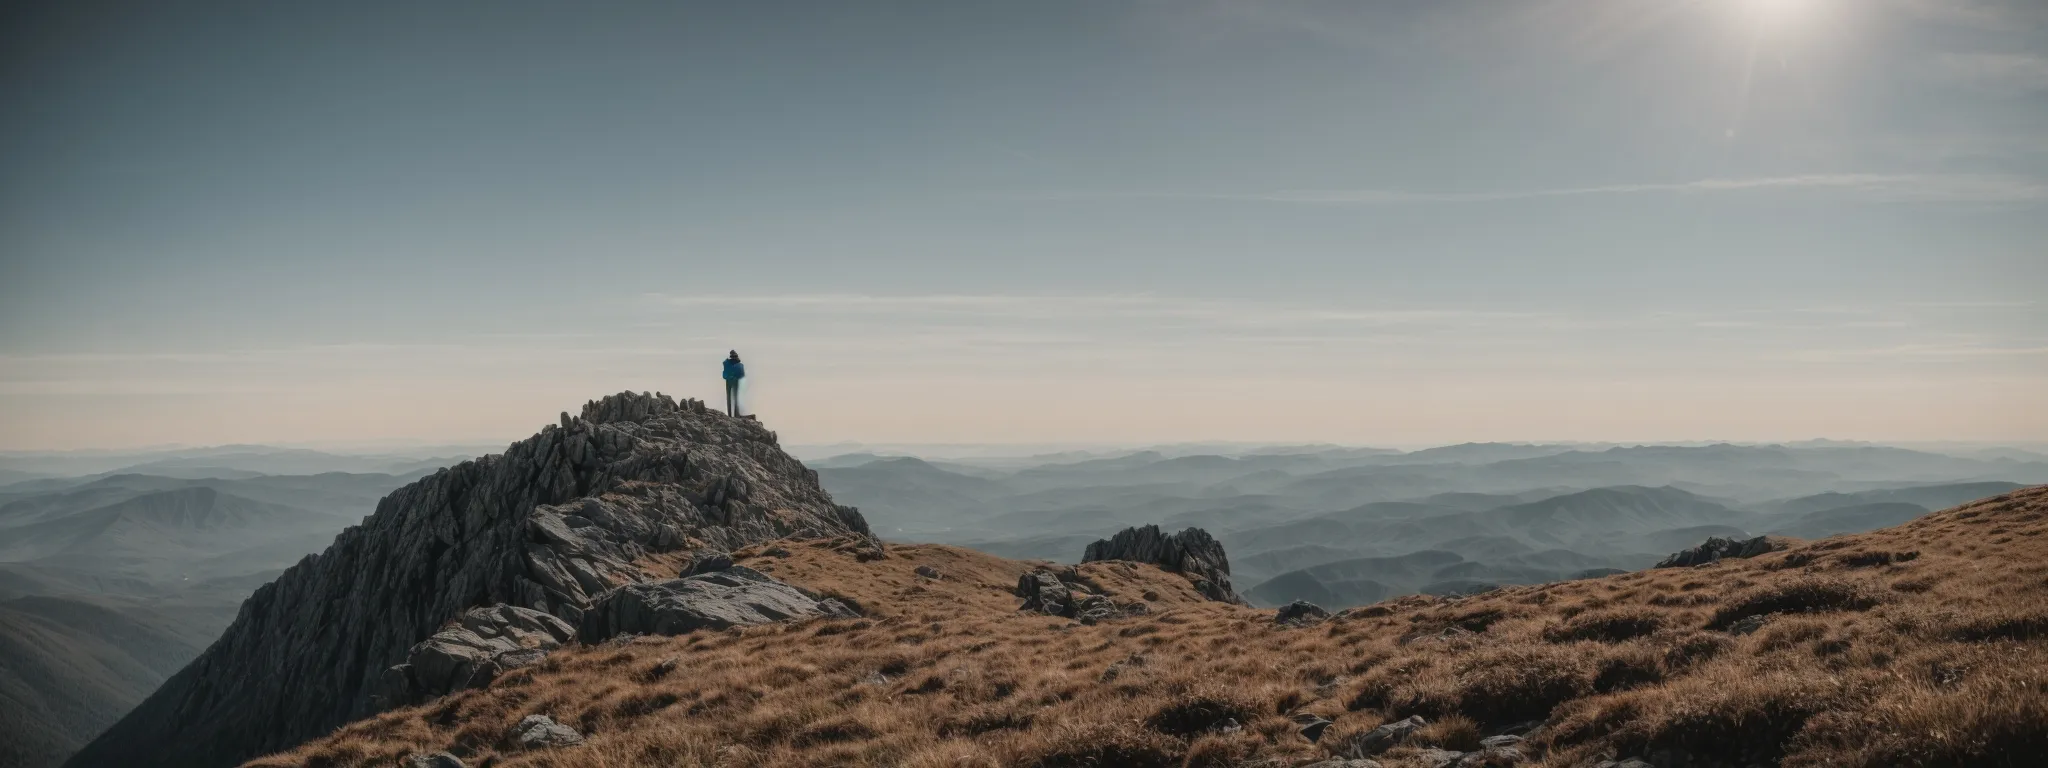 a hiker stands on a mountain summit, gazing out at a vast, untouched wilderness stretching into the horizon.